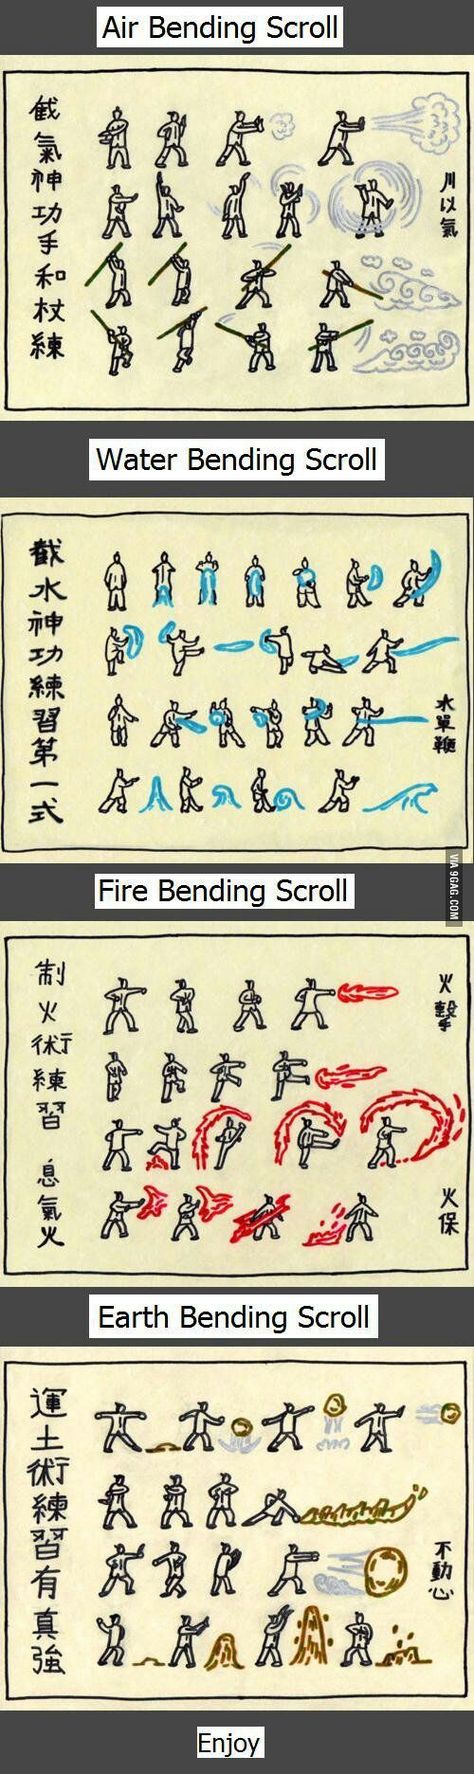 Avatar's bender training scroll. I need this, in case a fire nation attack  Brb gonna try it Earthbender Clothes, Water Bending, Menulis Novel, Magia Elemental, Avatarul Aang, Avatar The Last Airbender Funny, Elemental Powers, Avatar Funny, The Last Avatar